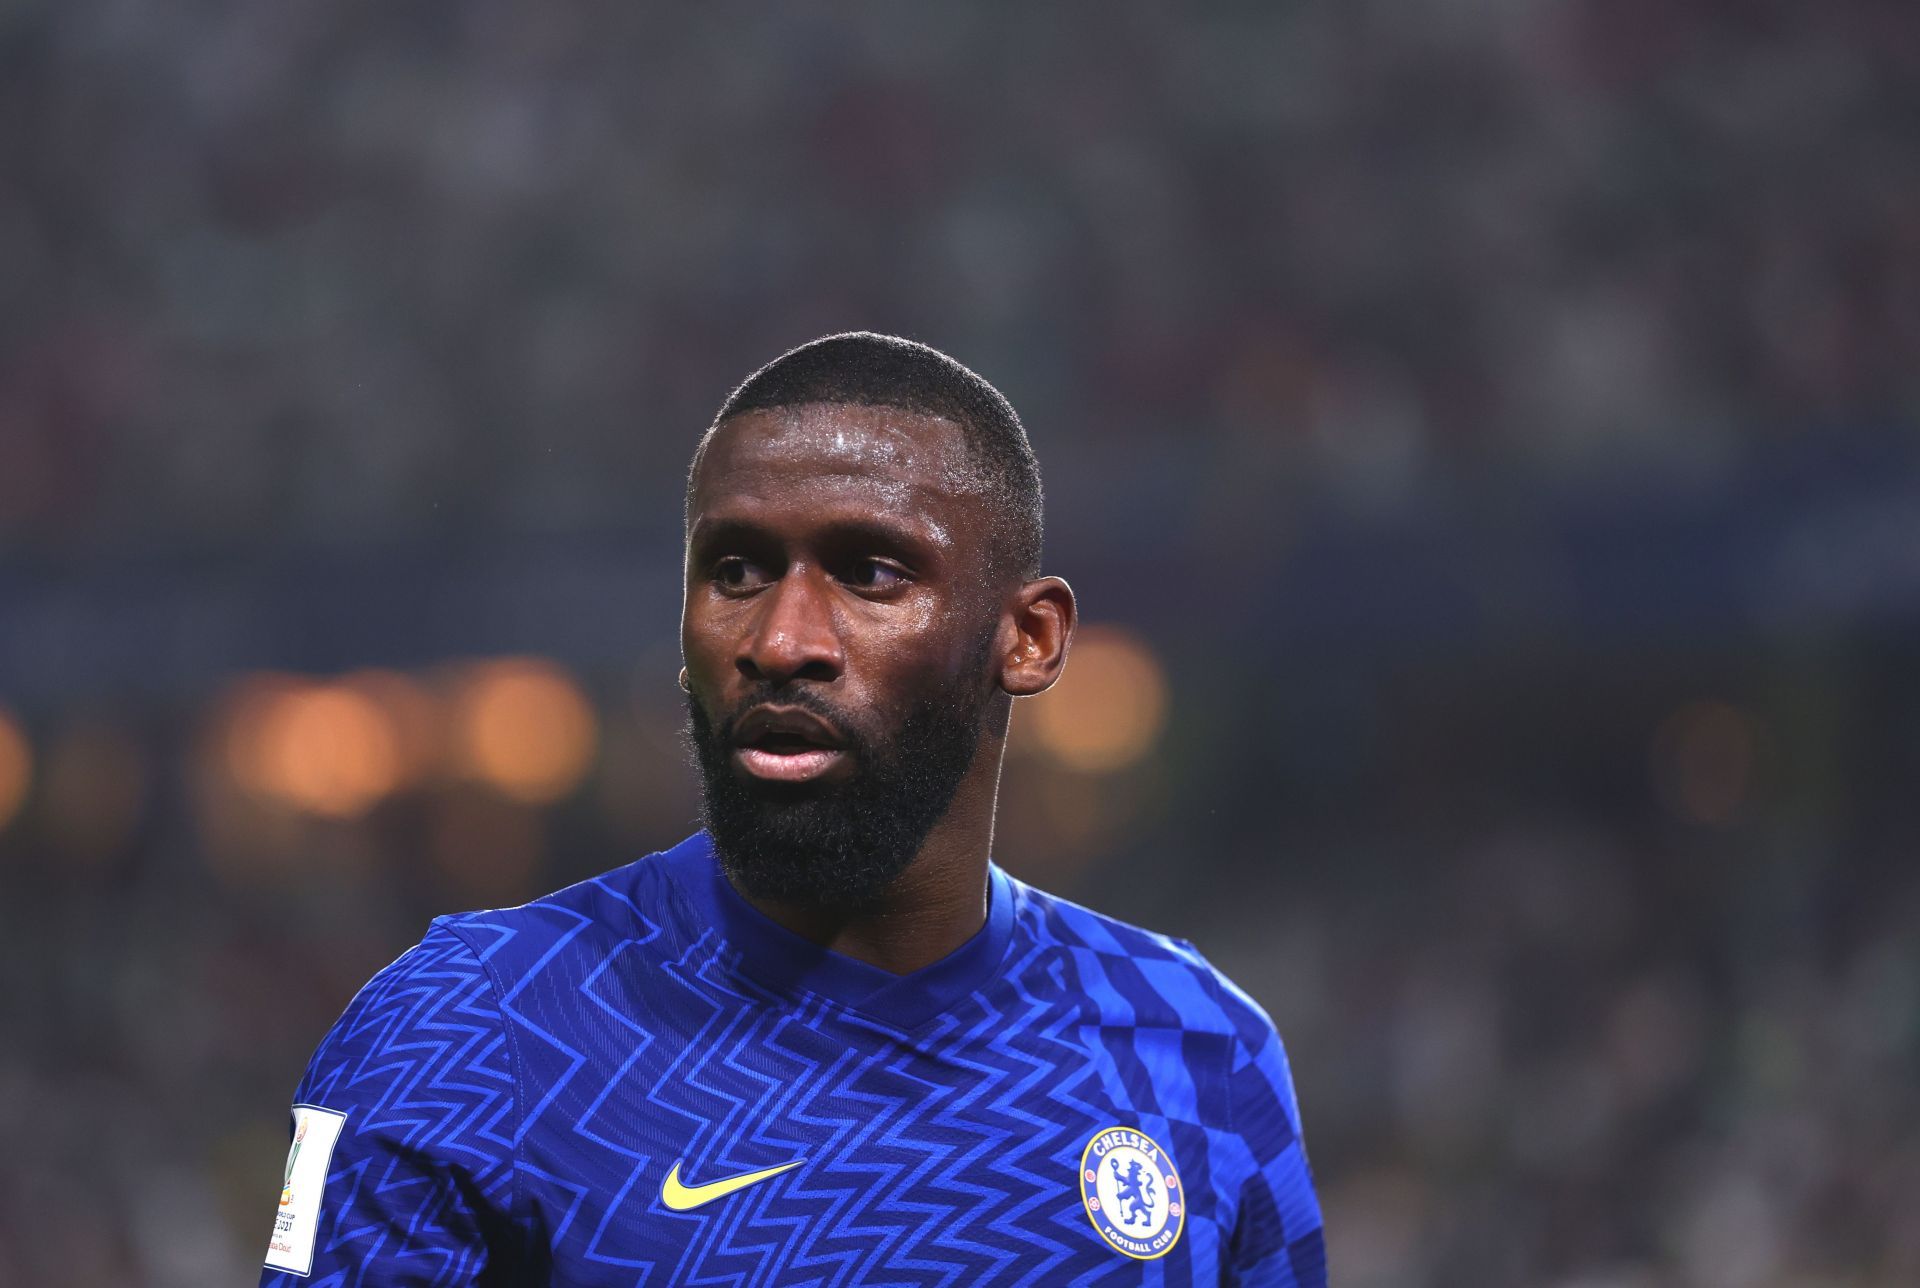 Antonio Rudiger has been in superb form for Chelsea this season.